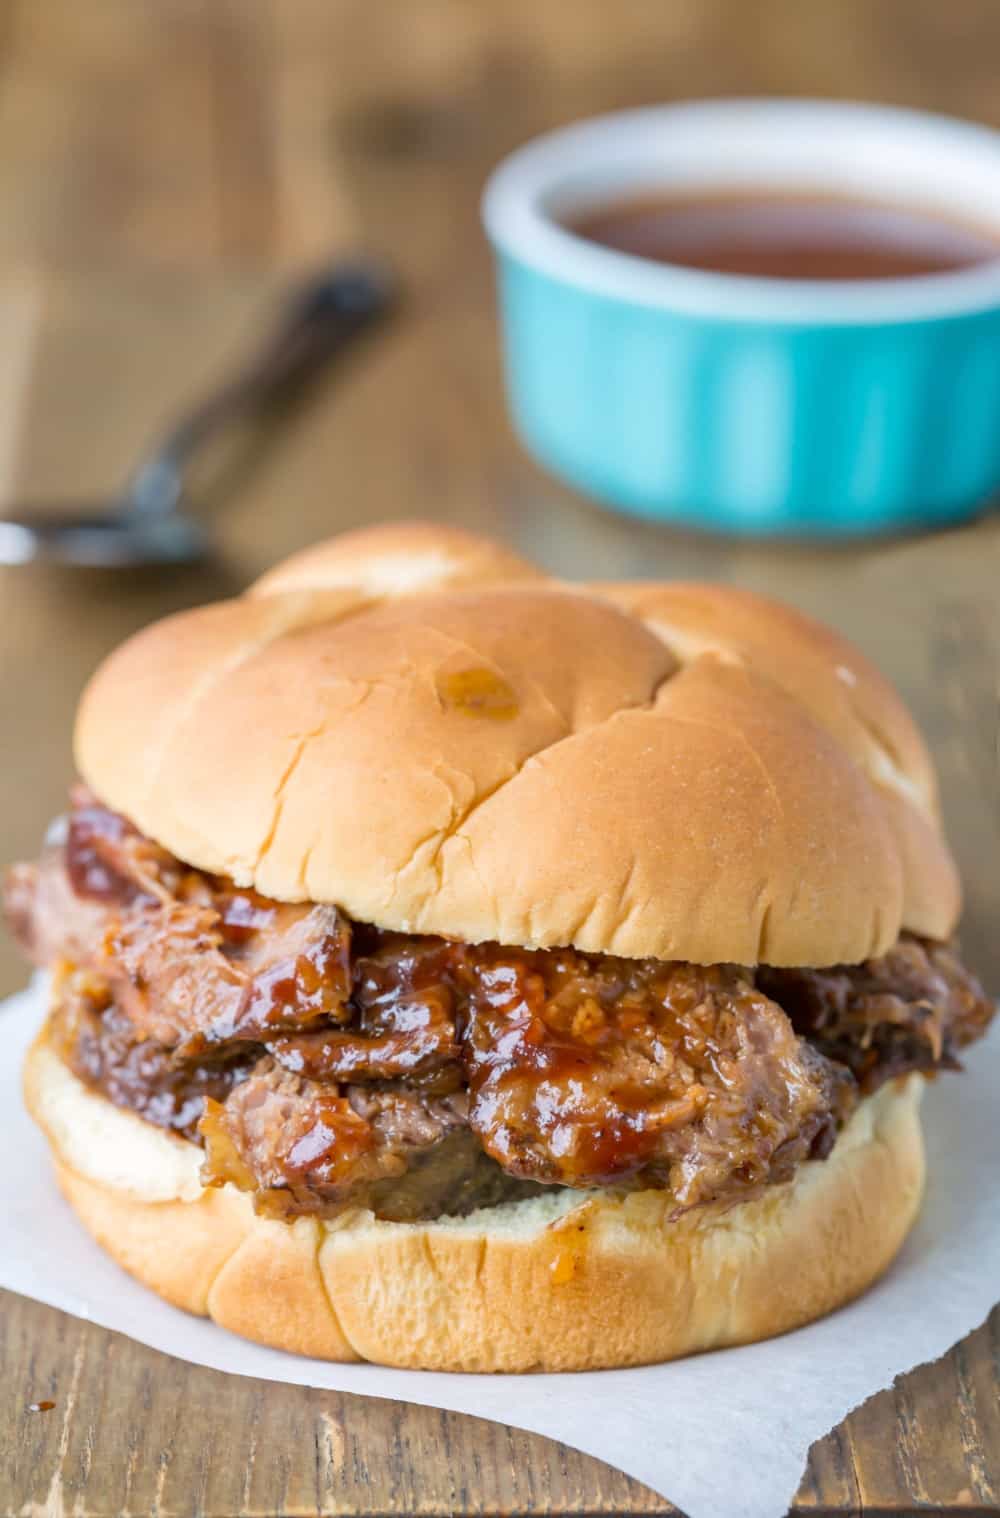 Slow Cooker Texas Brisket on a sandwich bun next to a bowl of barbecue sauce